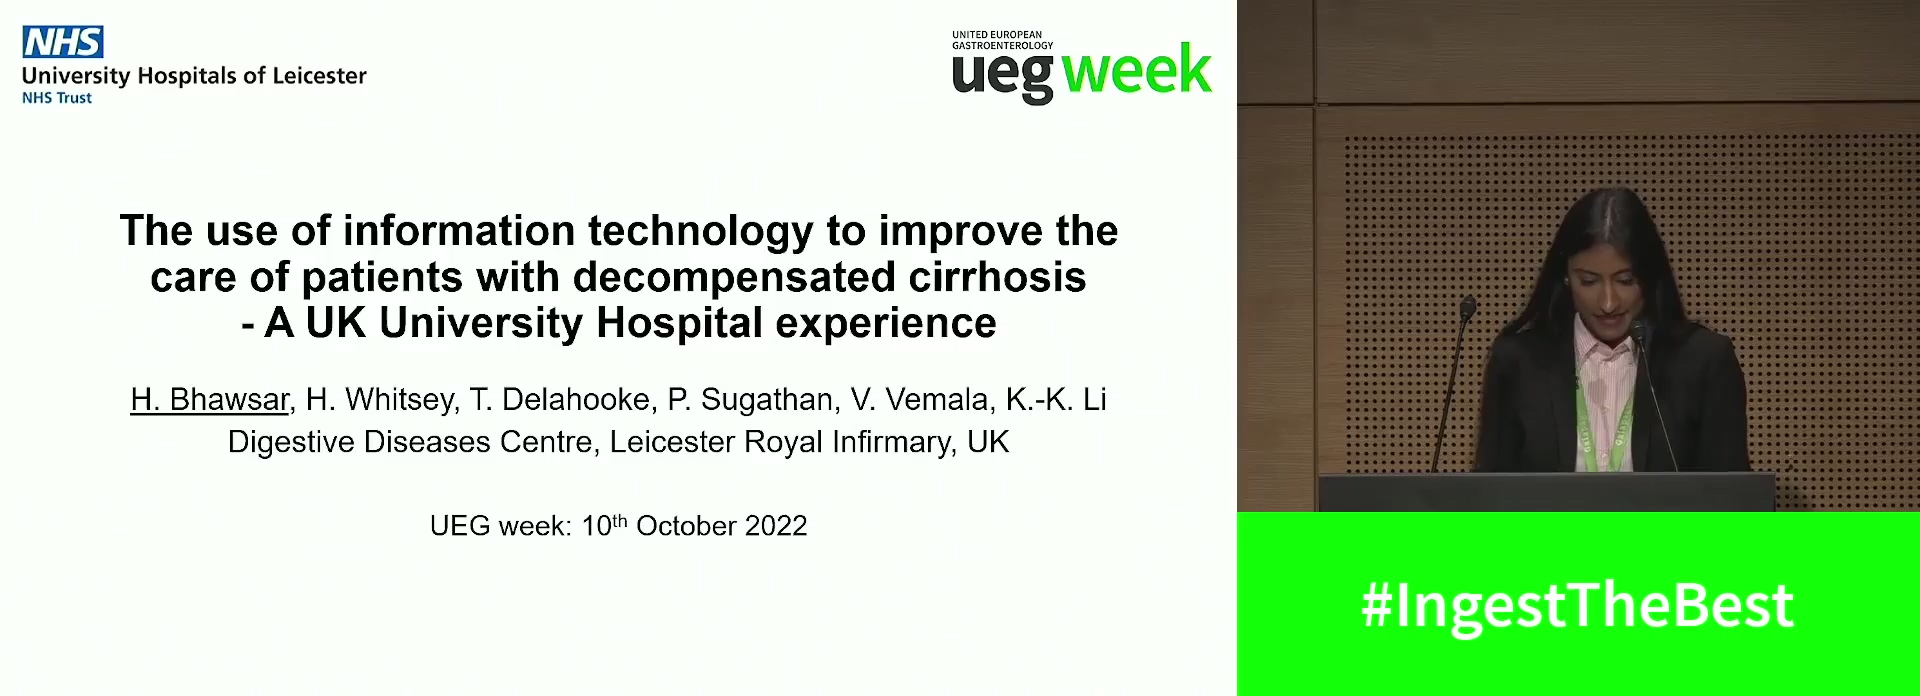 THE USE OF INFORMATION TECHNOLOGY TO IMPROVE THE CARE OF PATIENTS WITH DECOMPENSATED CIRRHOSIS - A UK UNIVERSITY HOSPITAL EXPERIENCE